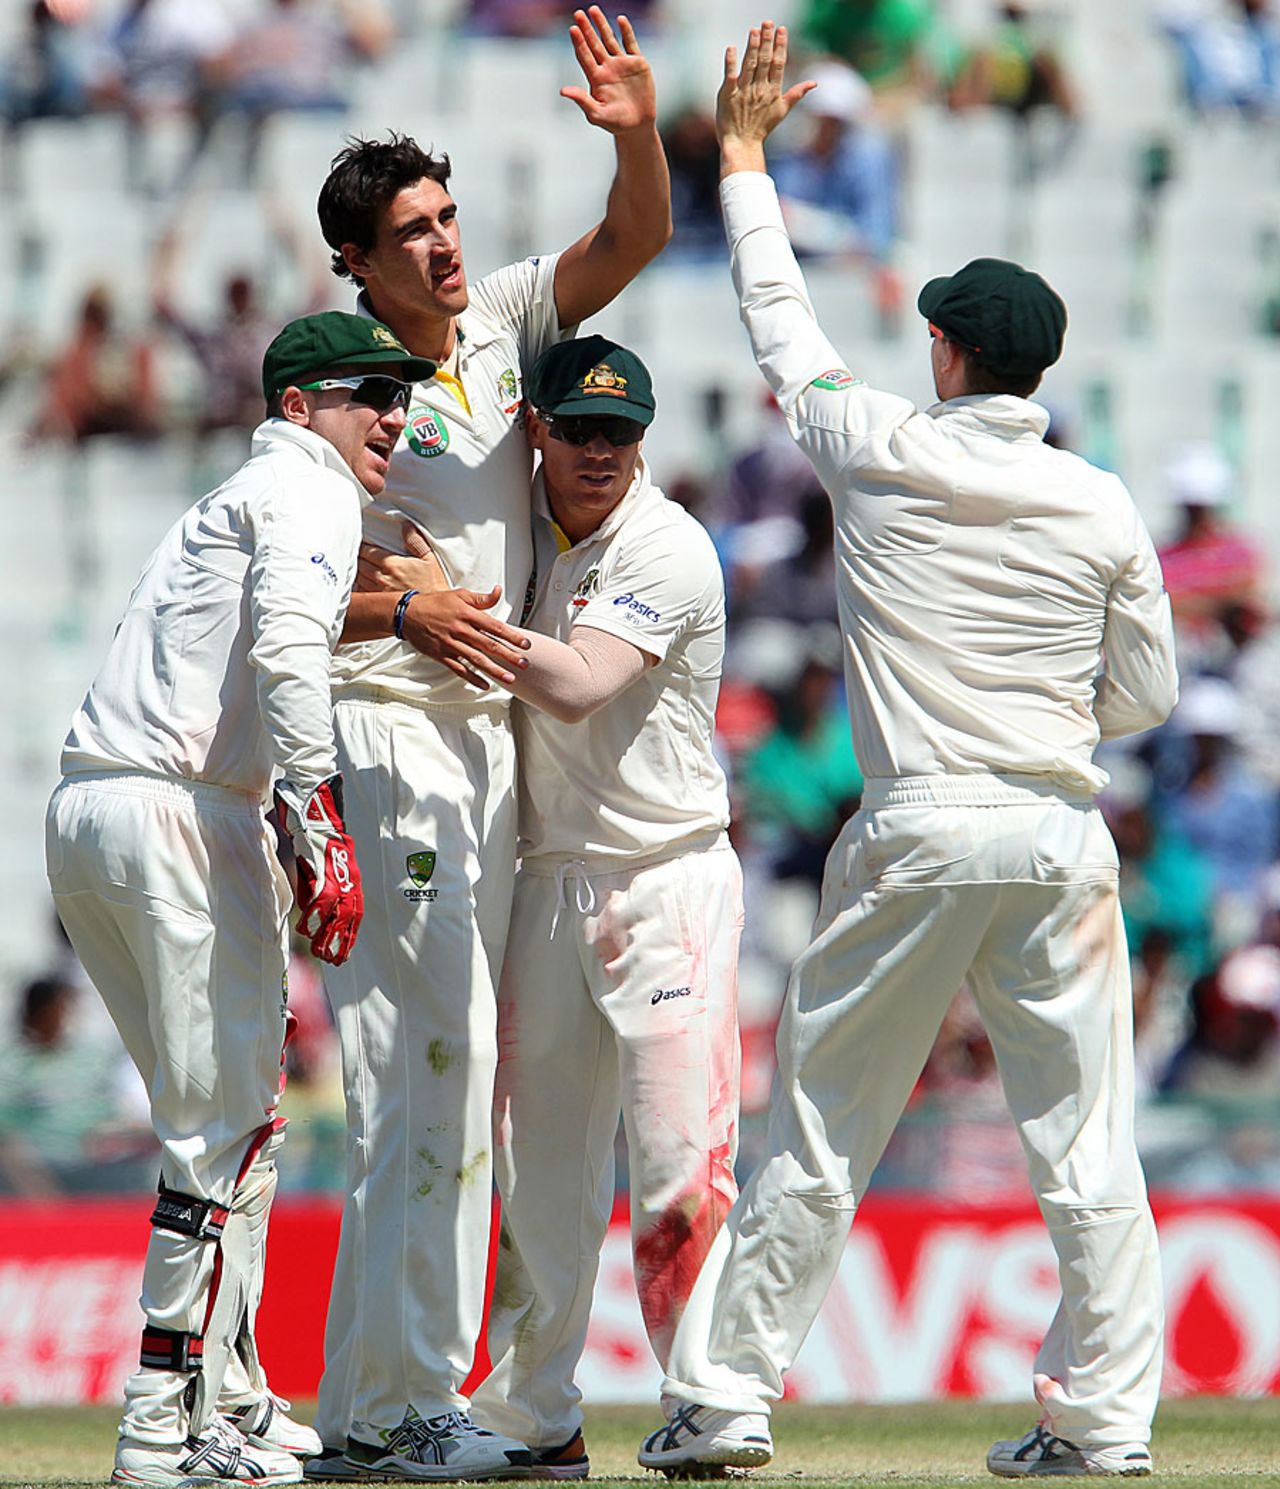 Mitchell Starc struck twice in one over, India v Australia, 3rd Test, Mohali, 4th day, March 17, 2013